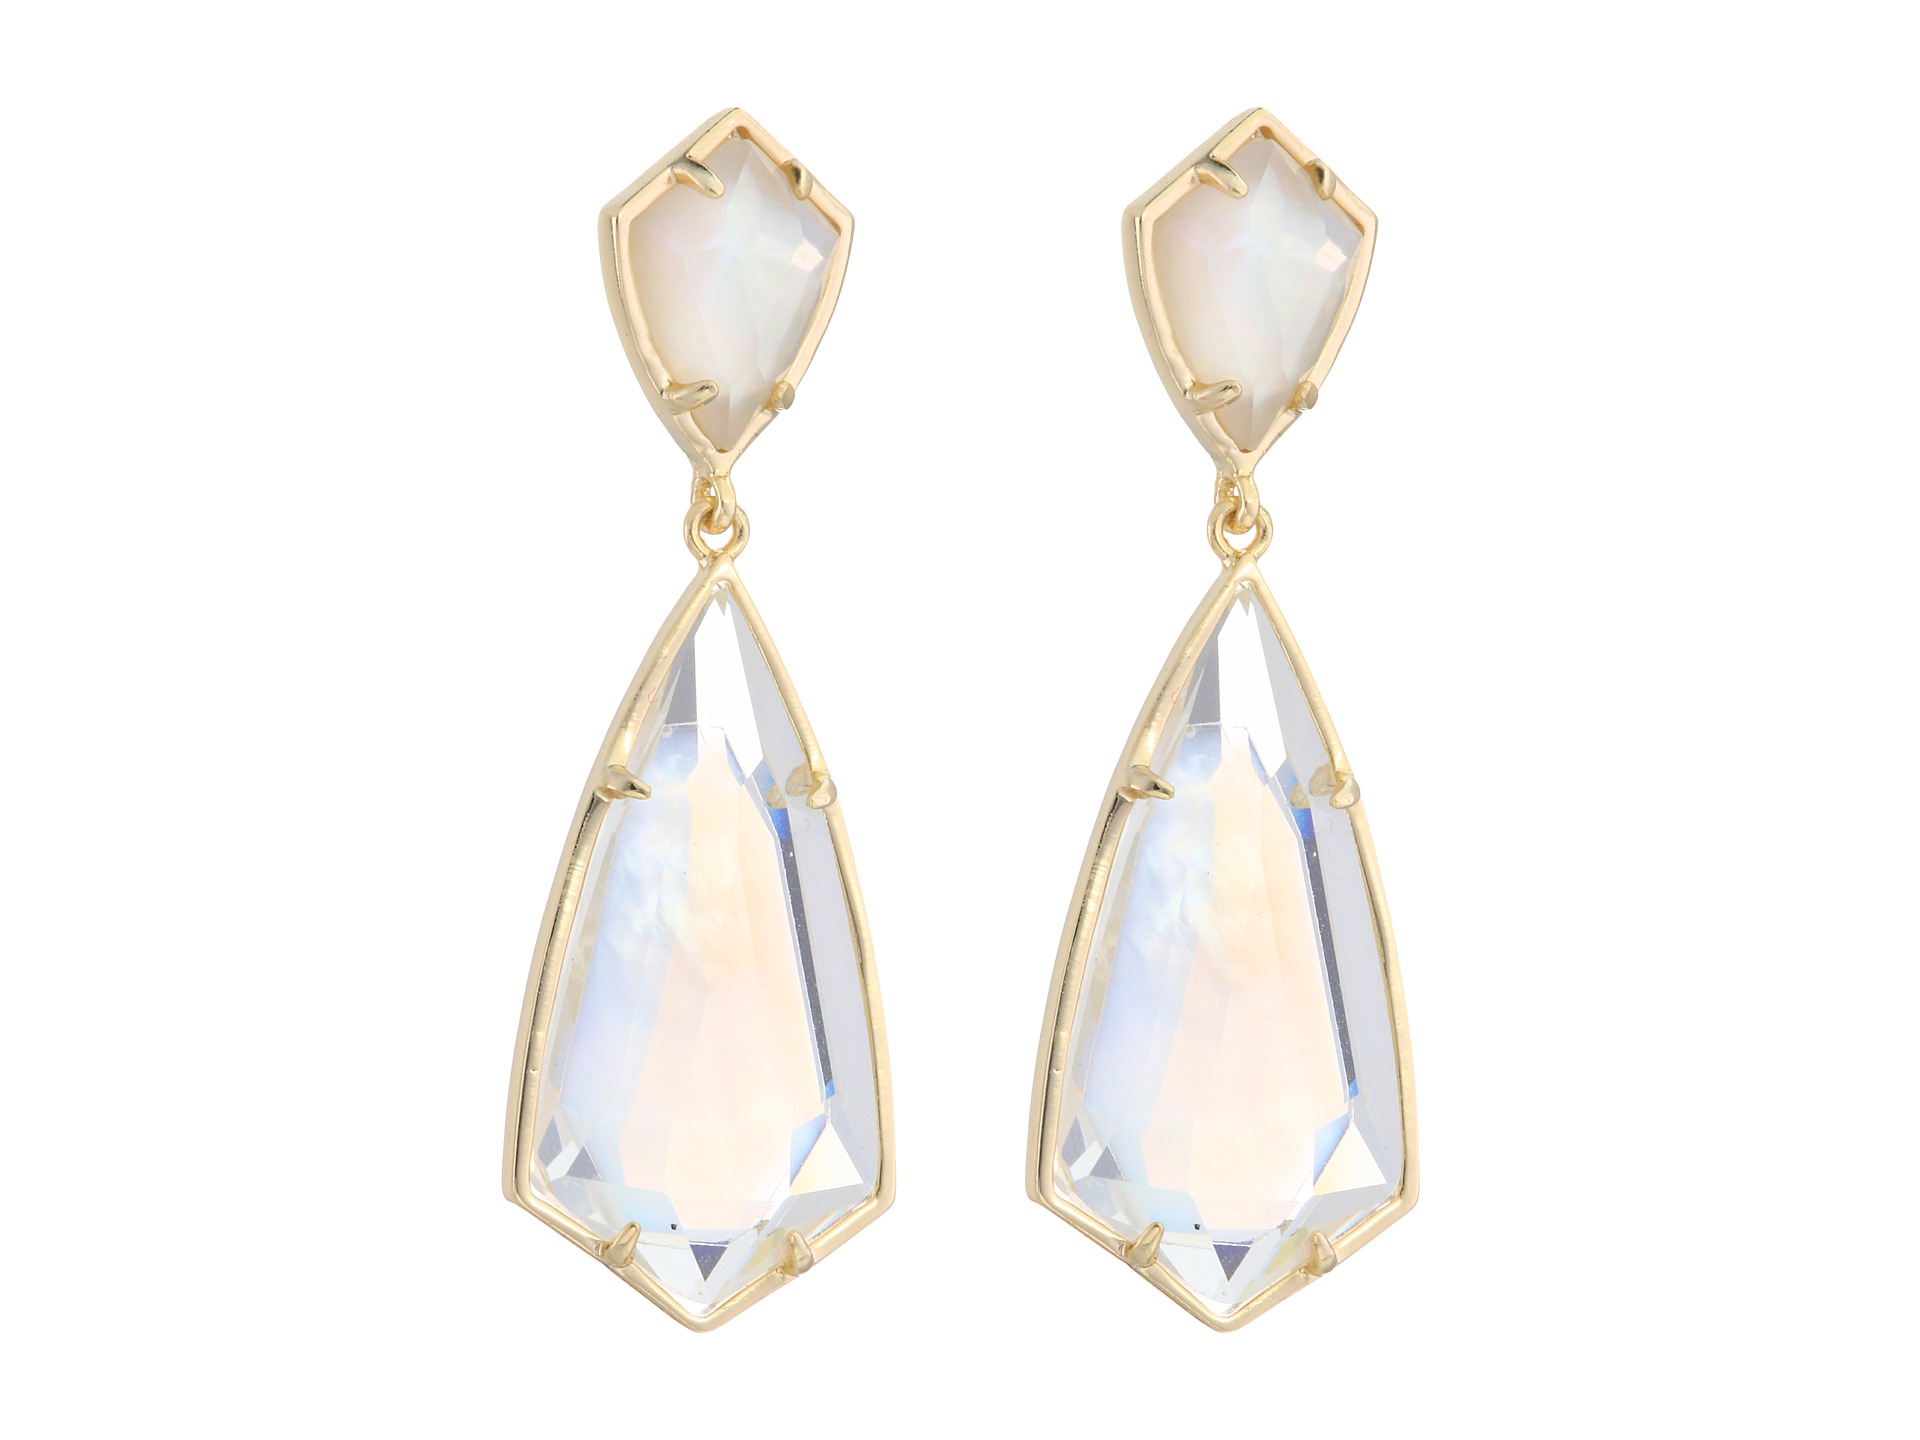 Kendra Scott Carey Earrings Gold/Ivory Mother-of-Pearl - Zappos.com ...